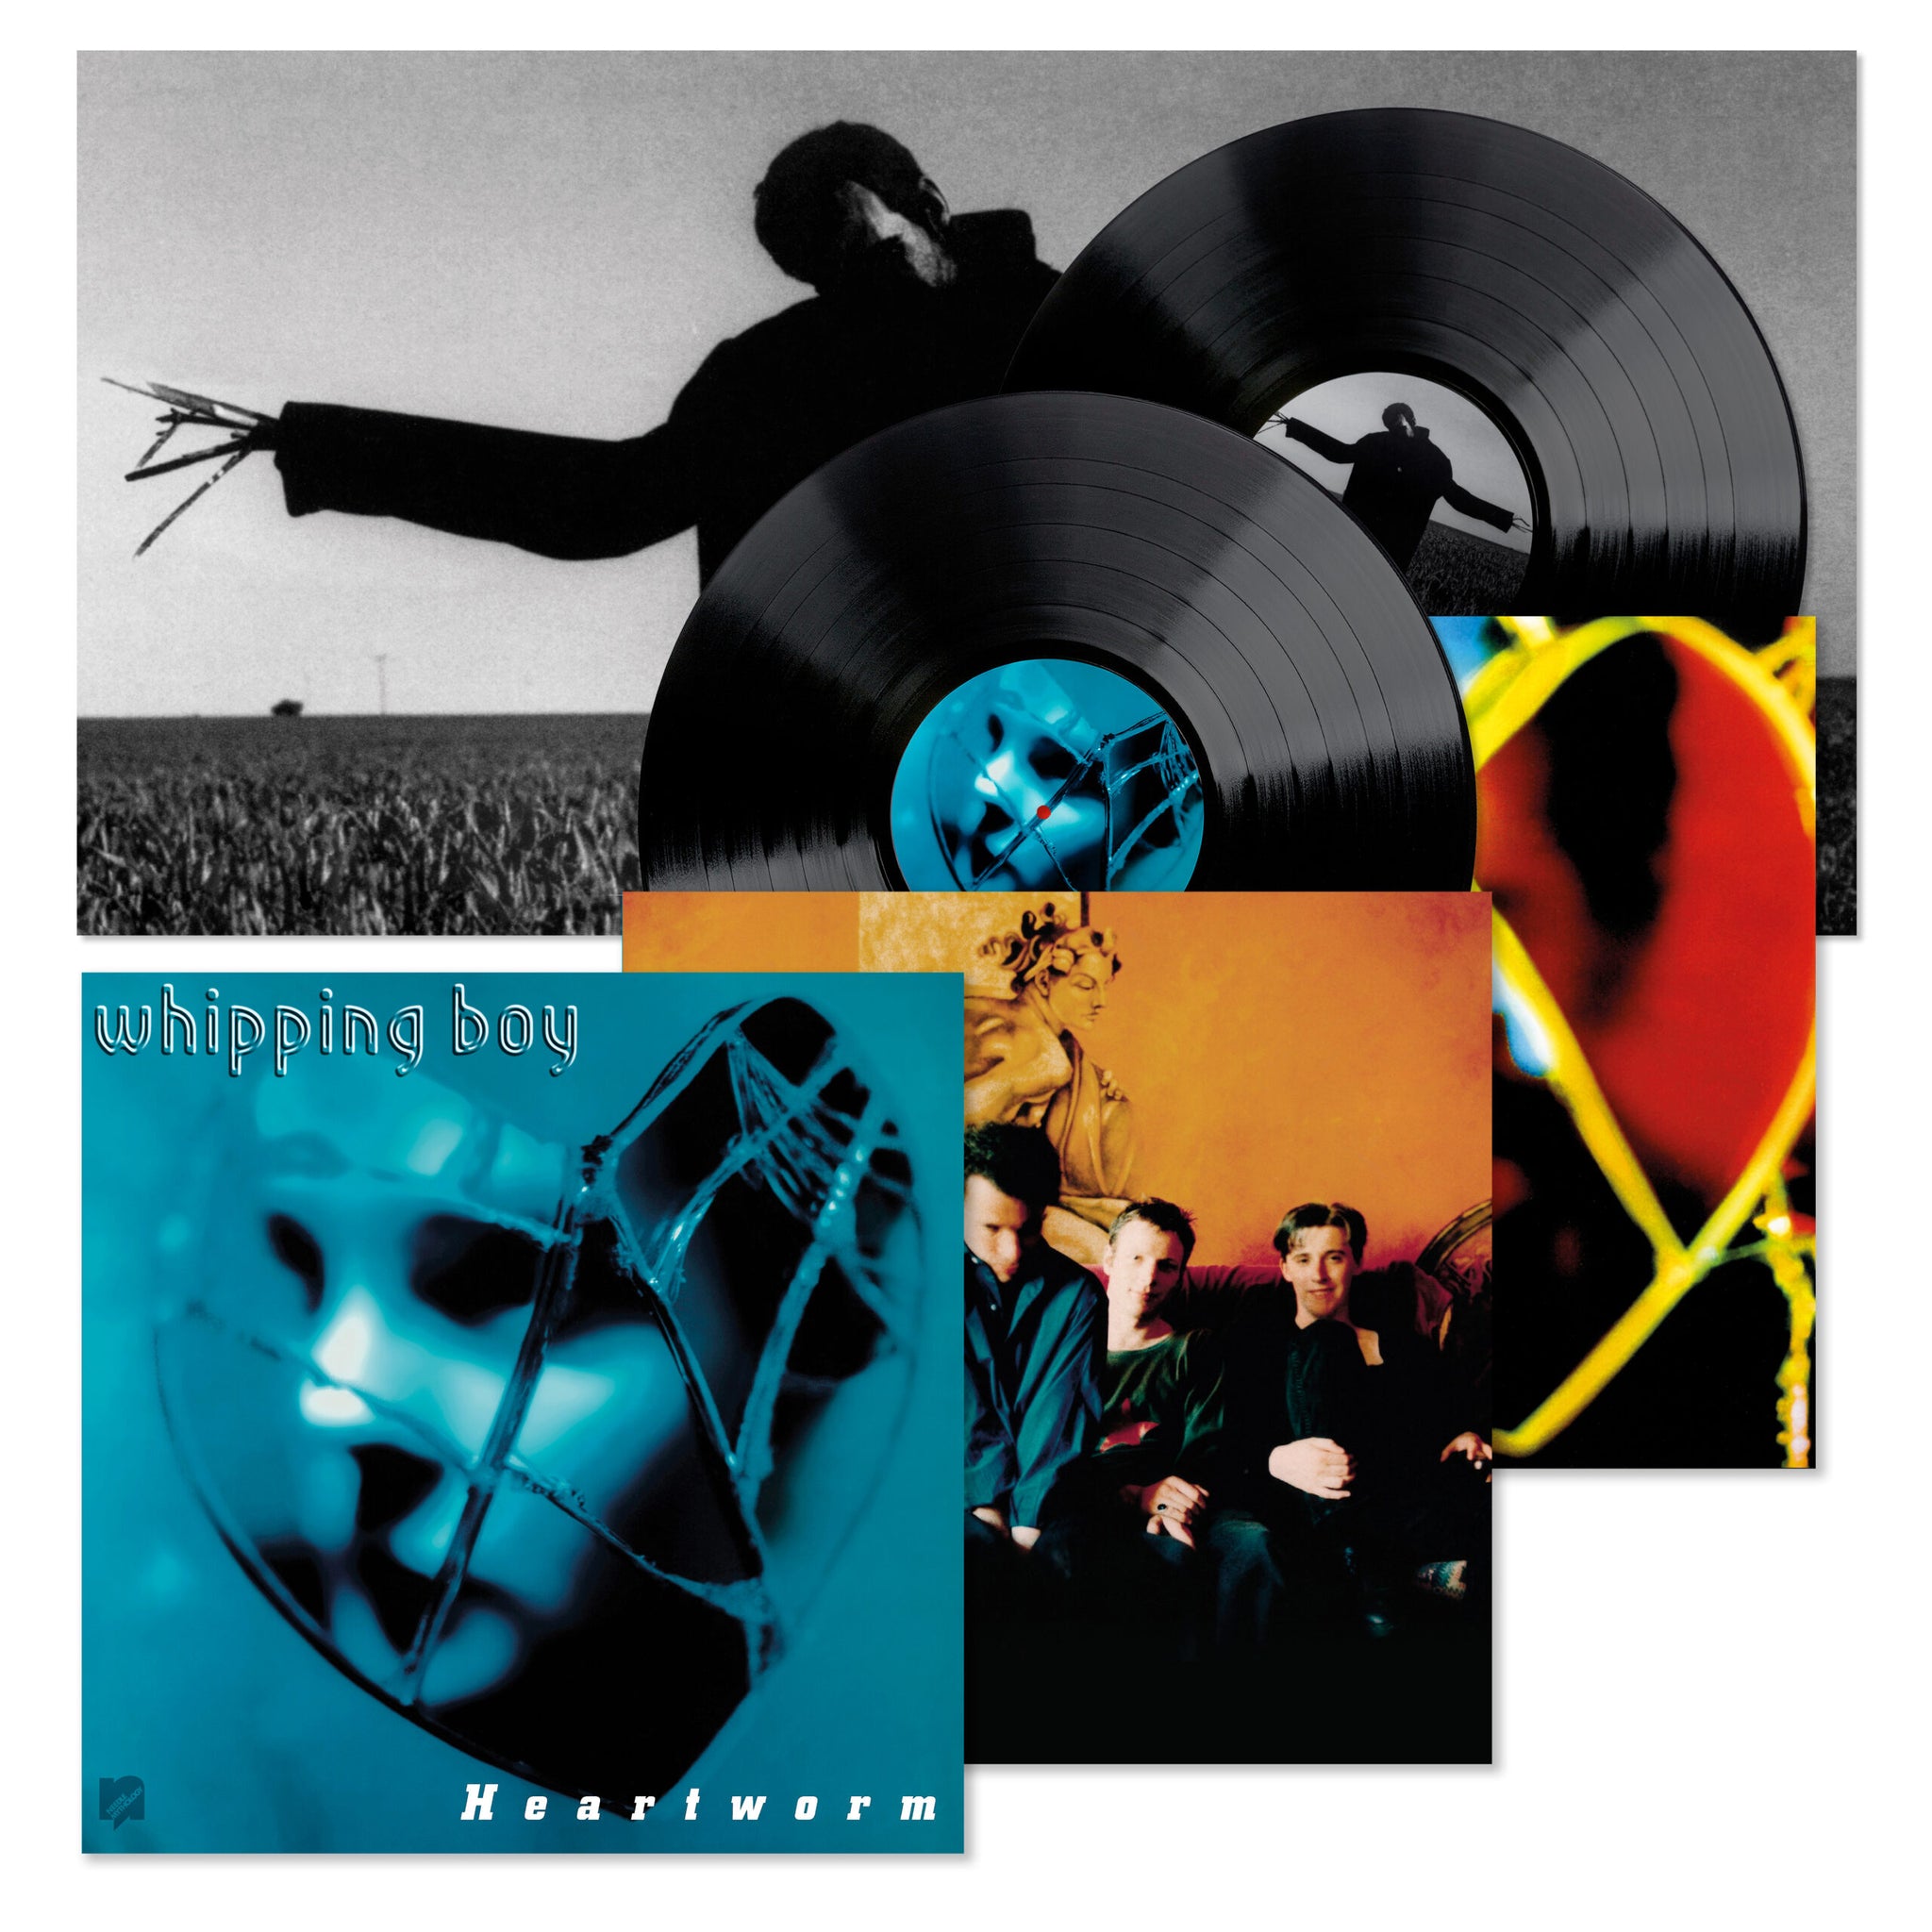 WHIPPING BOY - Heartworm (Expanded Edition) - 2LP - 180g Vinyl